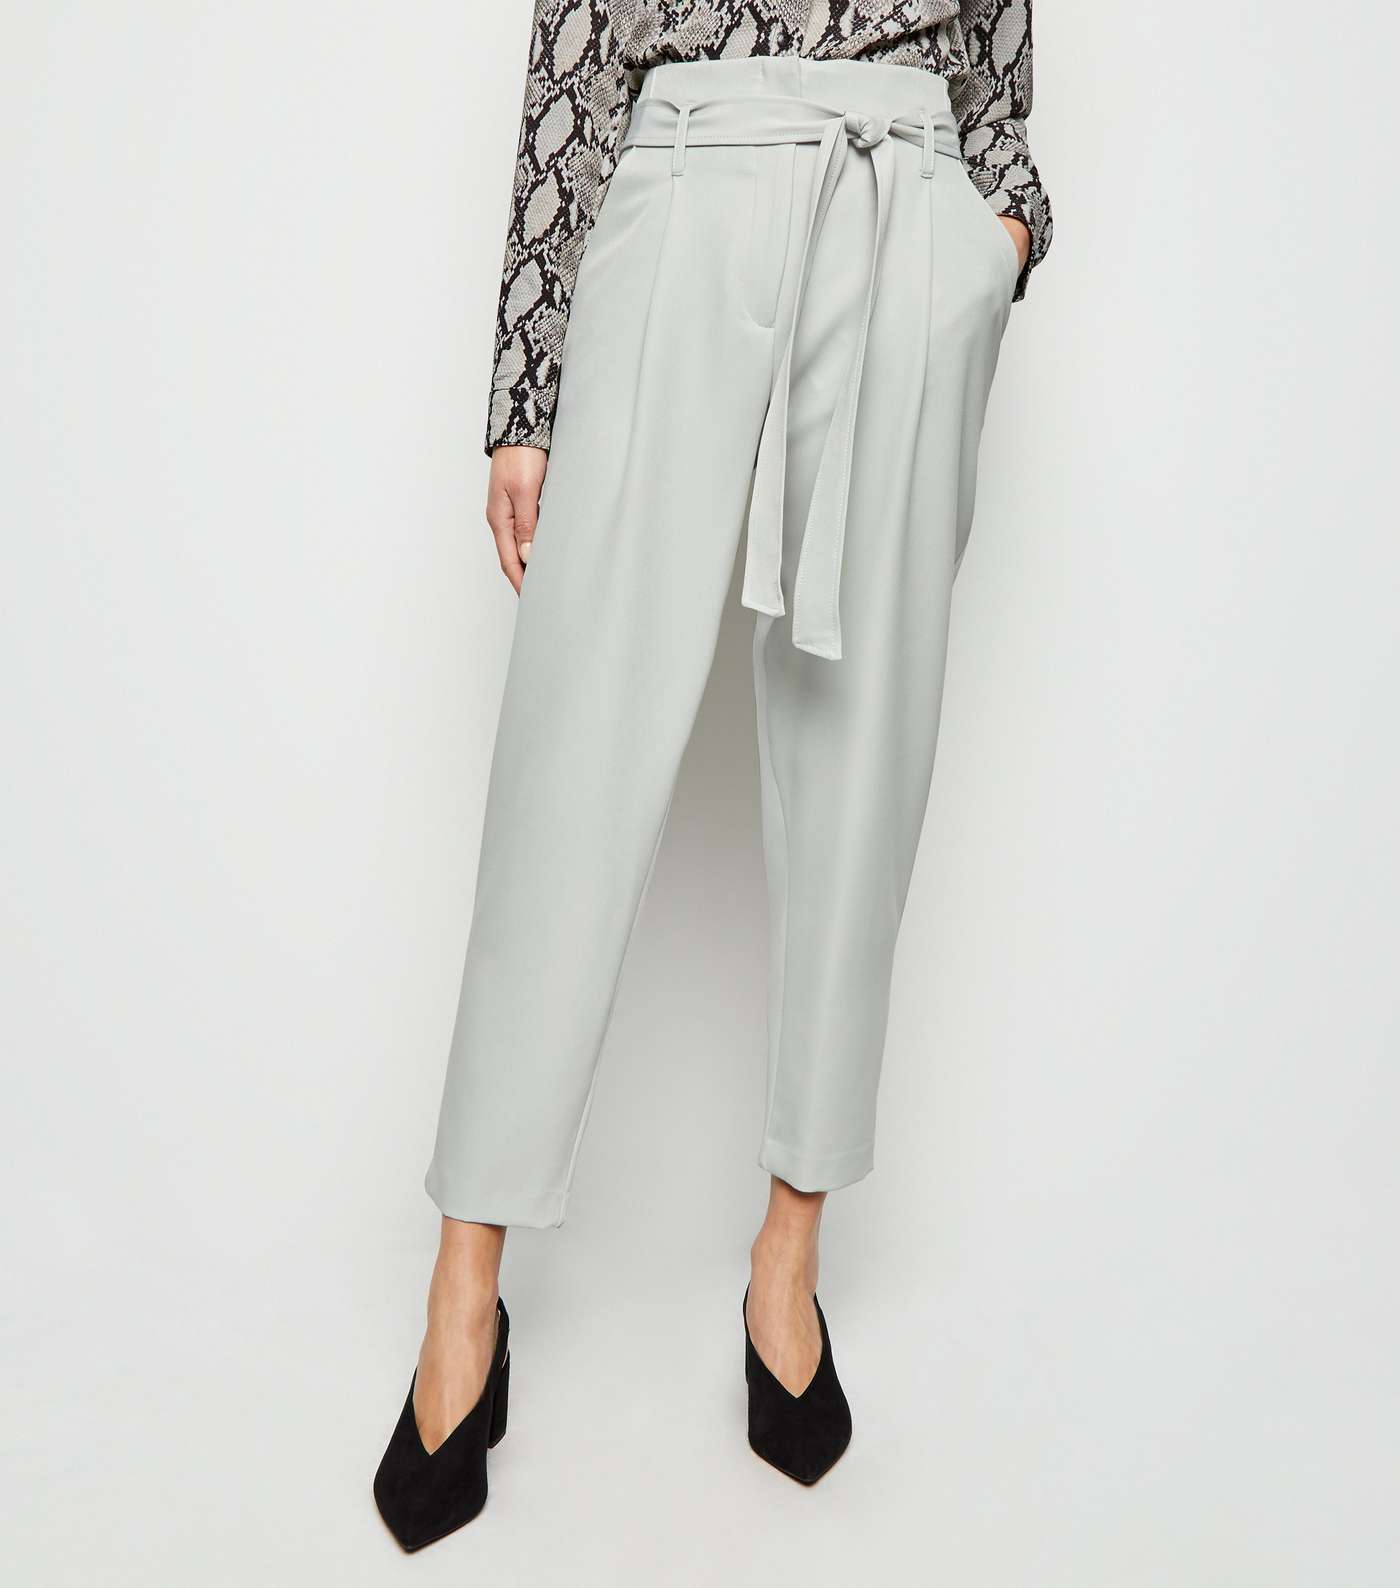 Mint Green High Waist Paperbag Trousers Image 2